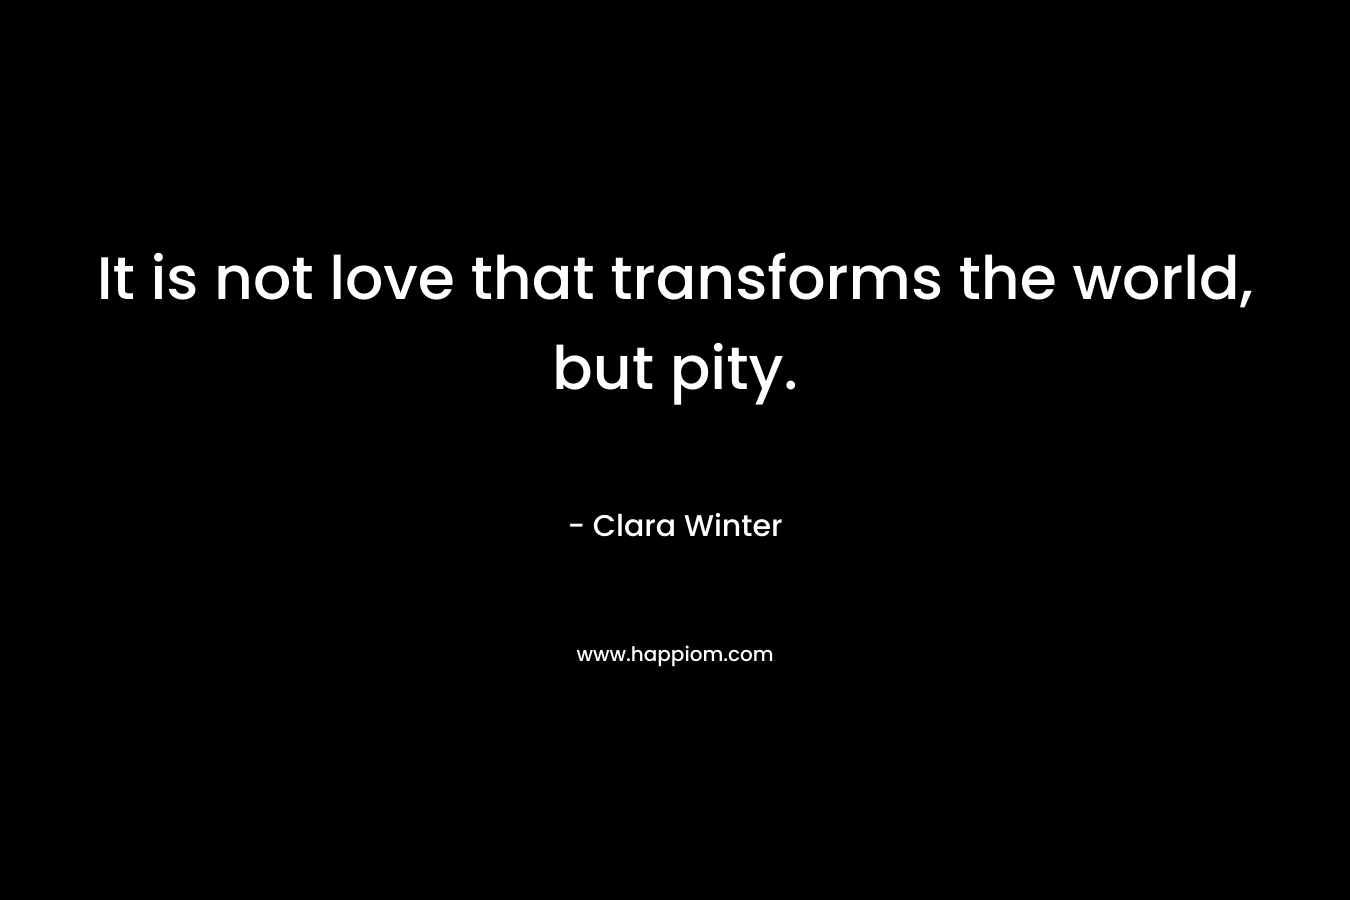 It is not love that transforms the world, but pity. – Clara Winter